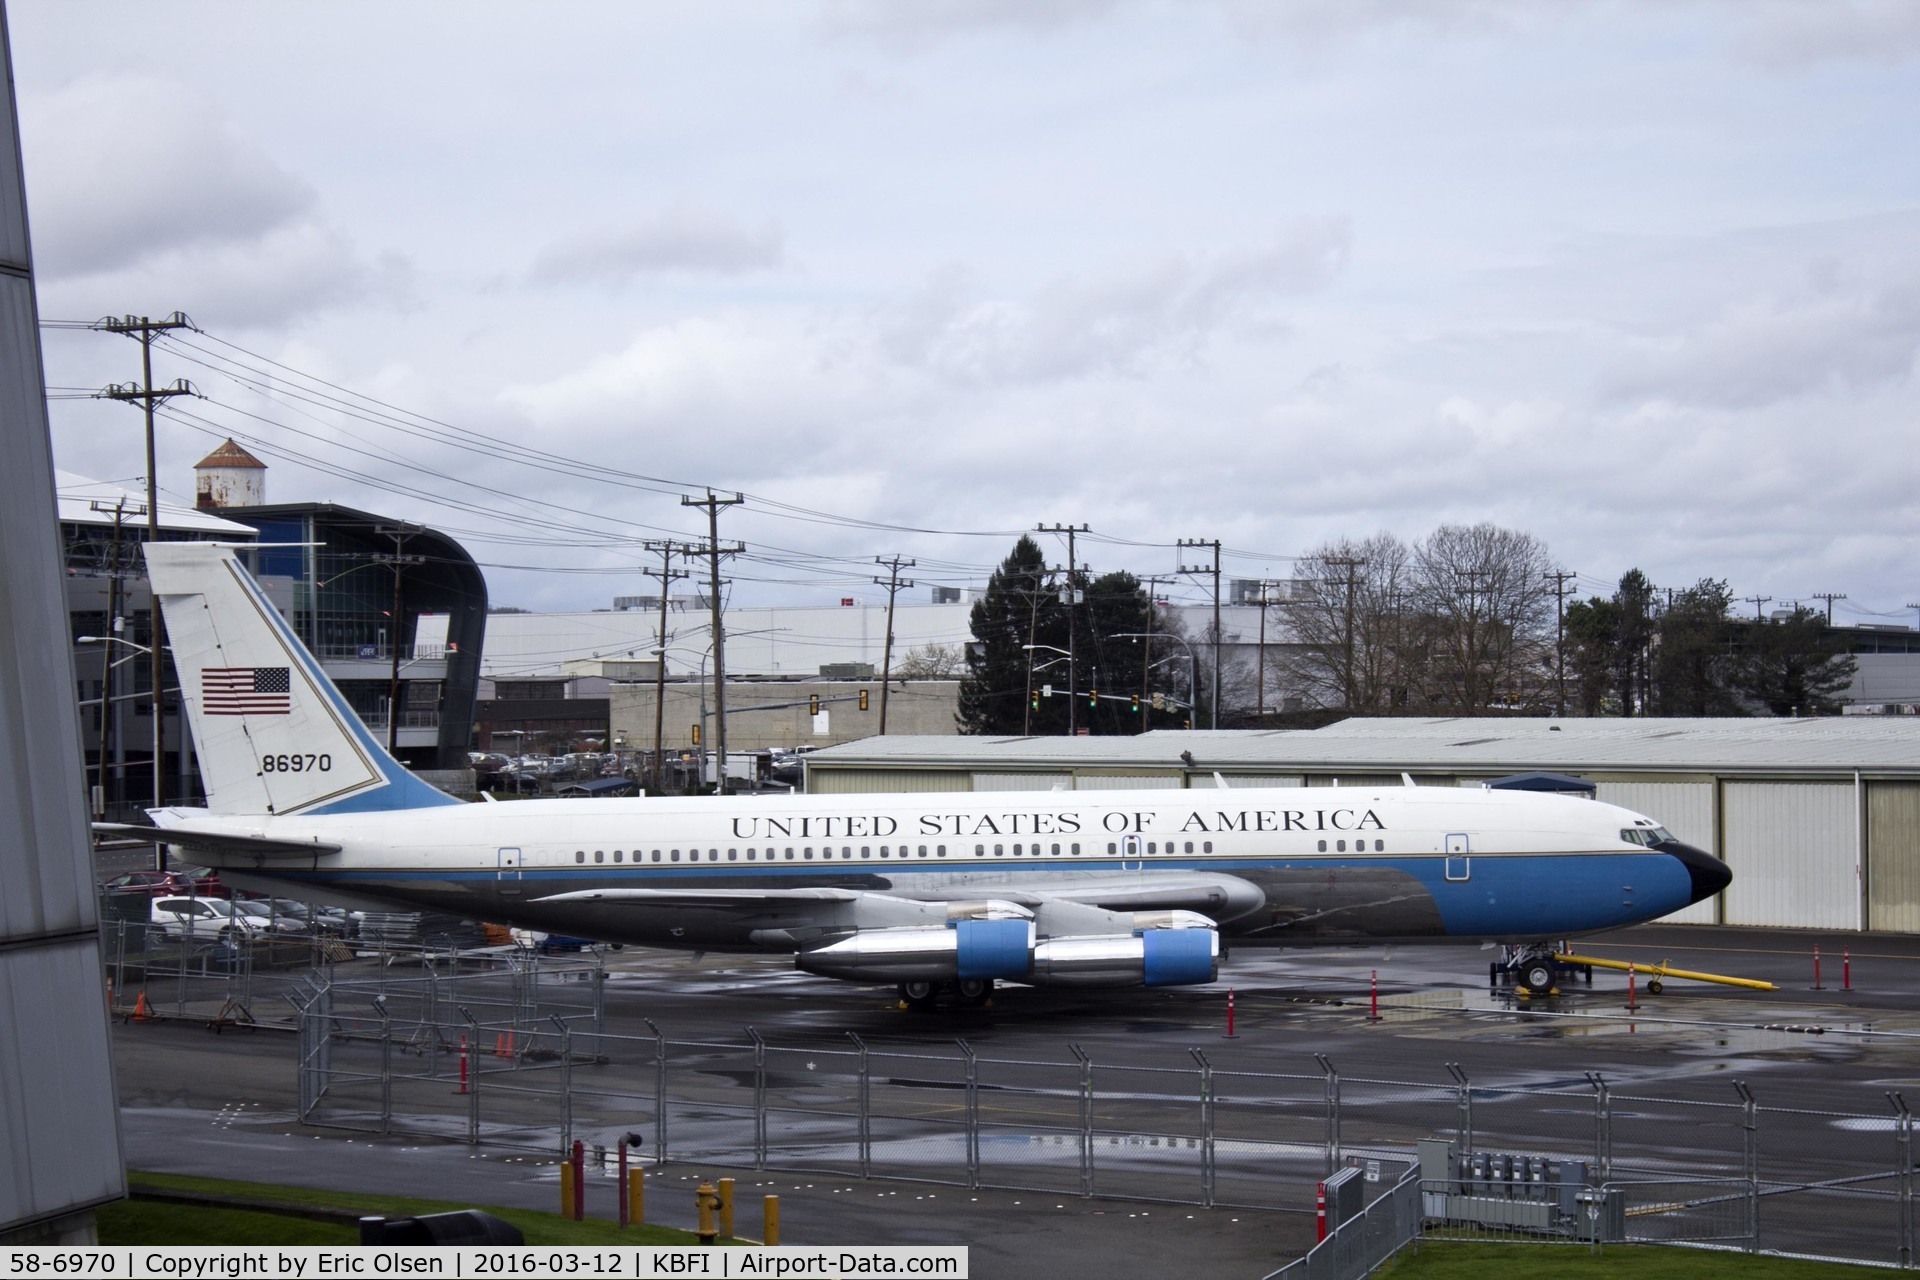 58-6970, 1959 Boeing VC-137B C/N 17925, VC137B 58-6970 is the 1st presidential jet and is known as SAM 970. She is on loan to the Museum of Flight in Seattle, WA at KBFI from the National Museum of the US Air Force.